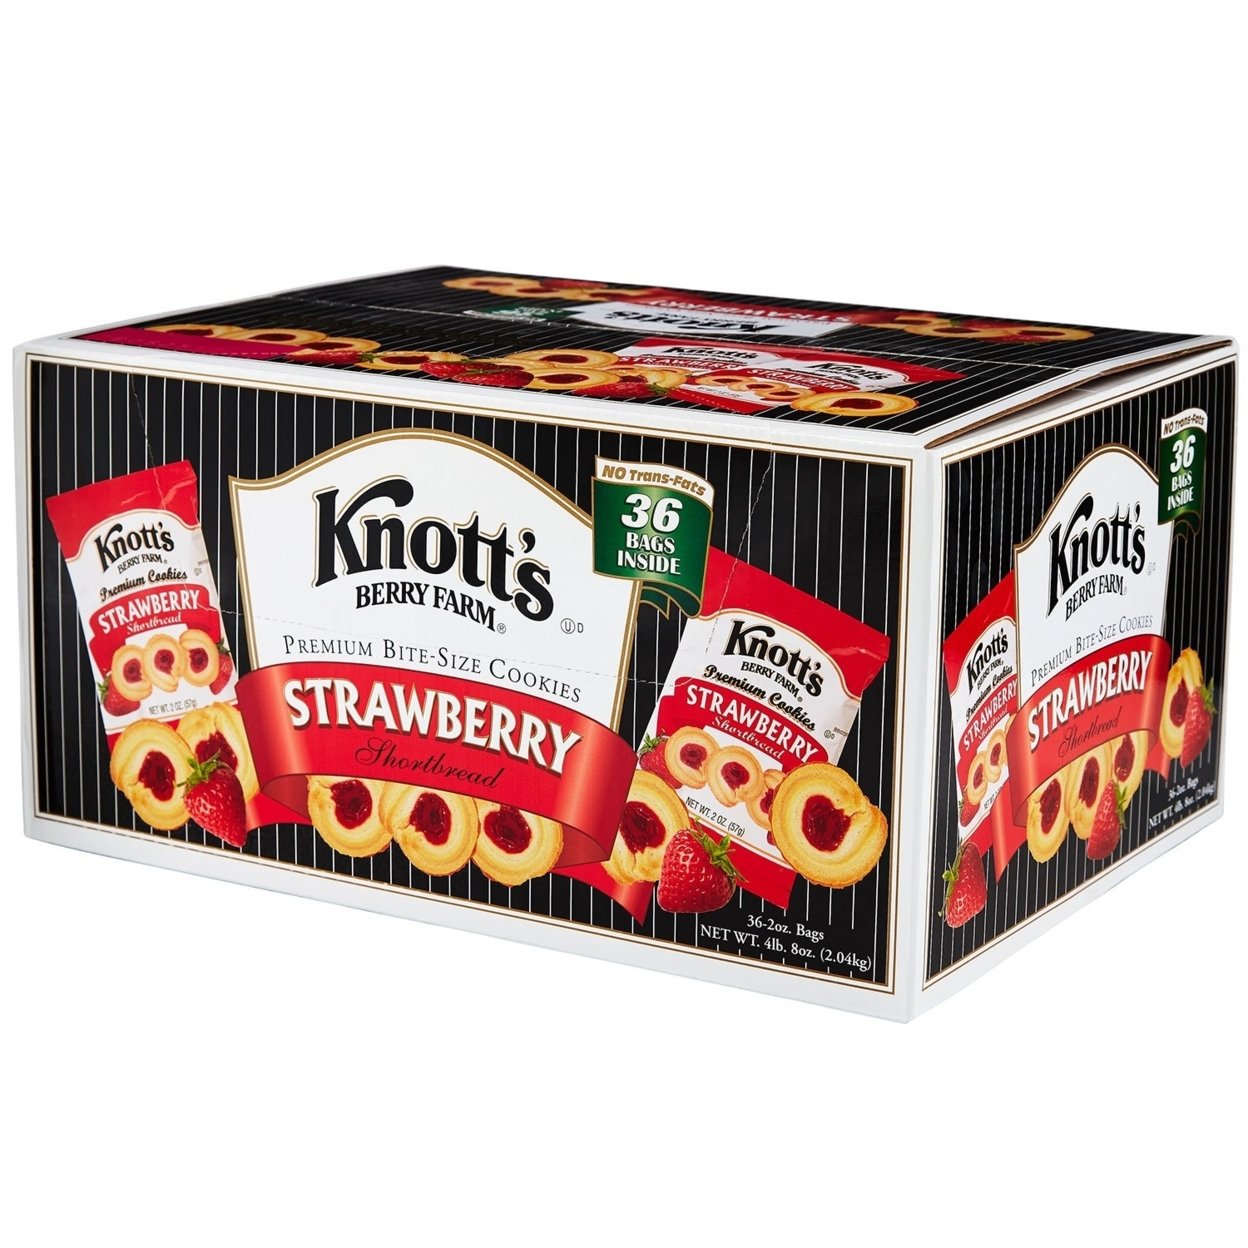 Knott's Berry Farm Strawberry Shortbread Cookies (2 Ounce, 36 Pack)